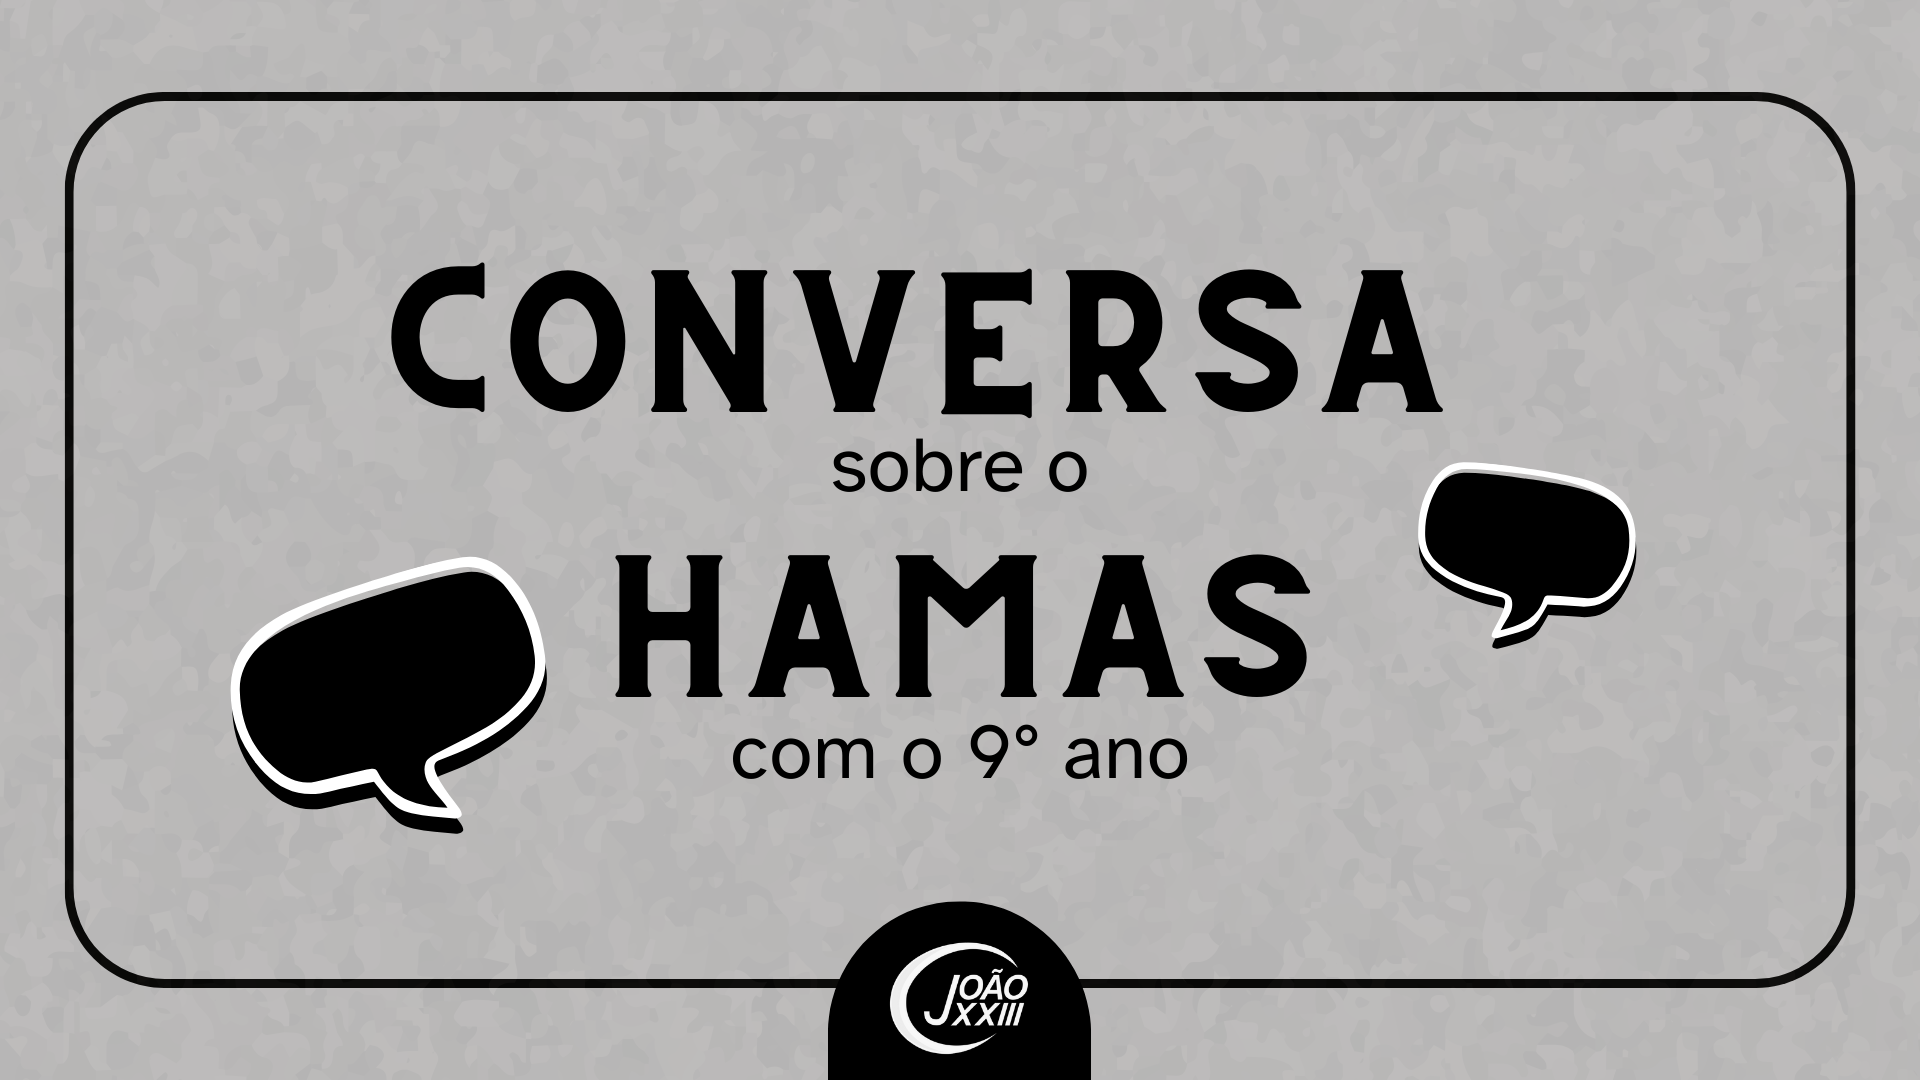 You are currently viewing Conversa sobre Hamas